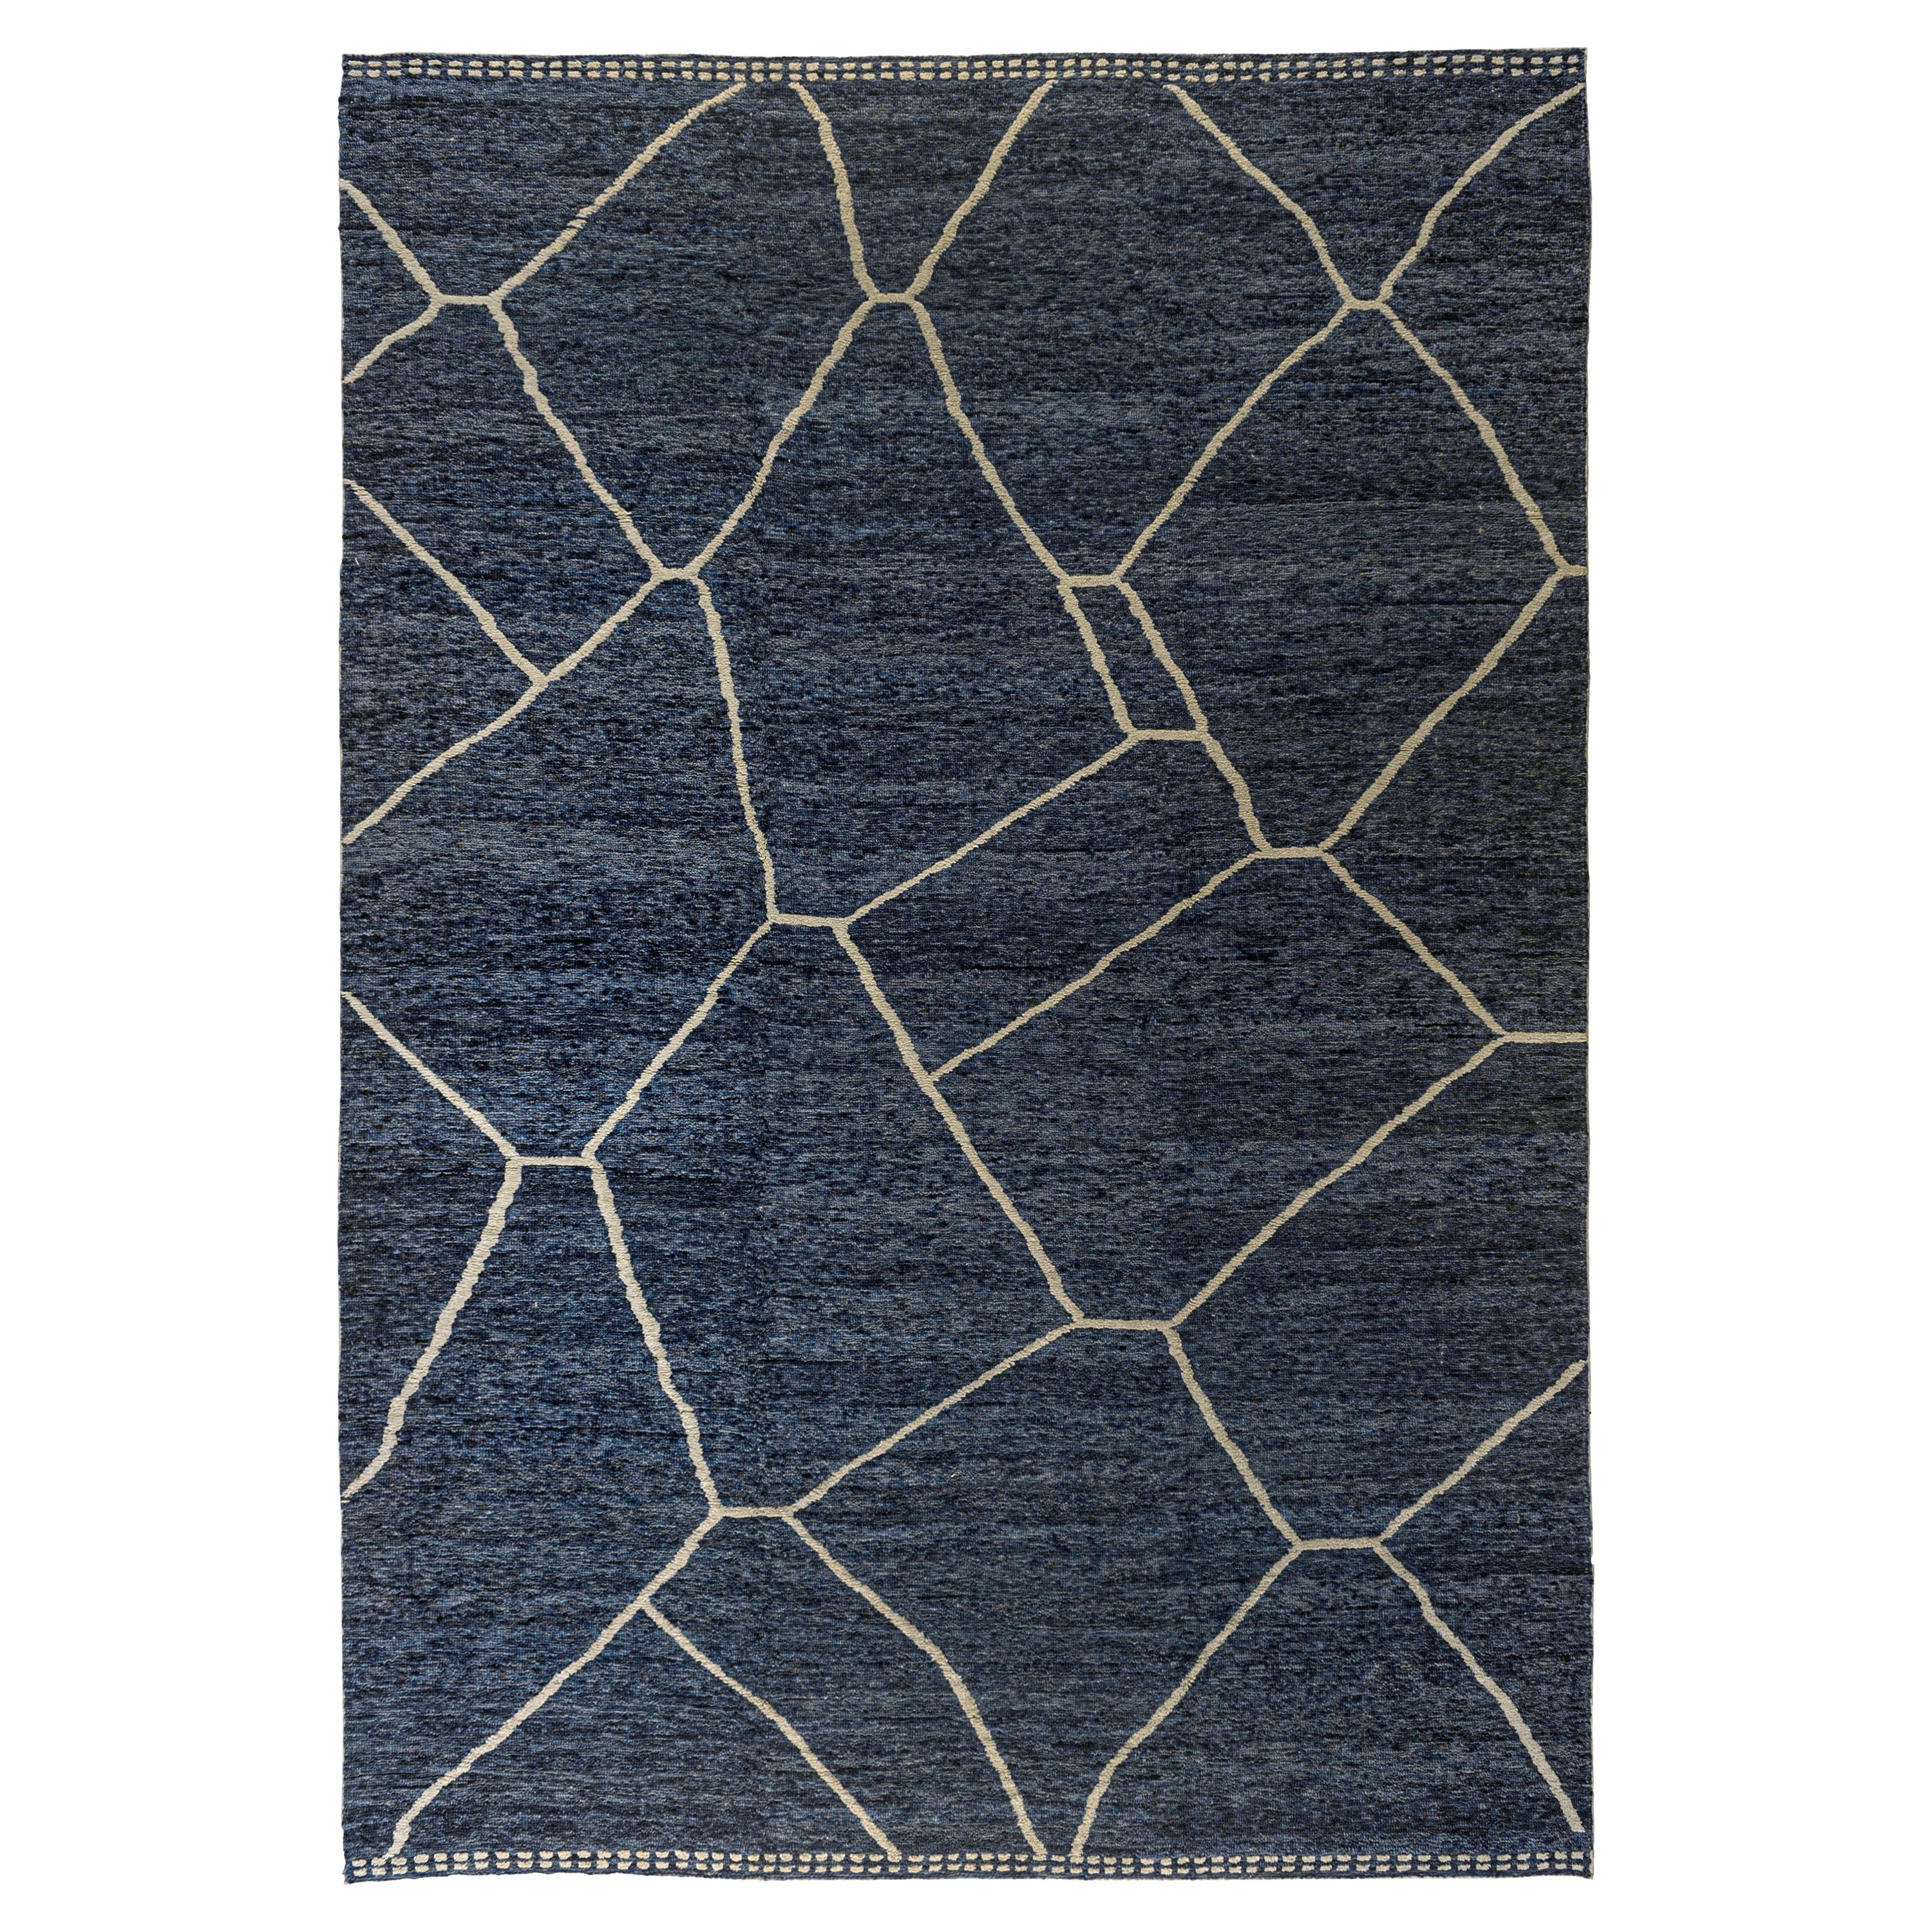 Blue Moroccan Inspired Rug For Sale